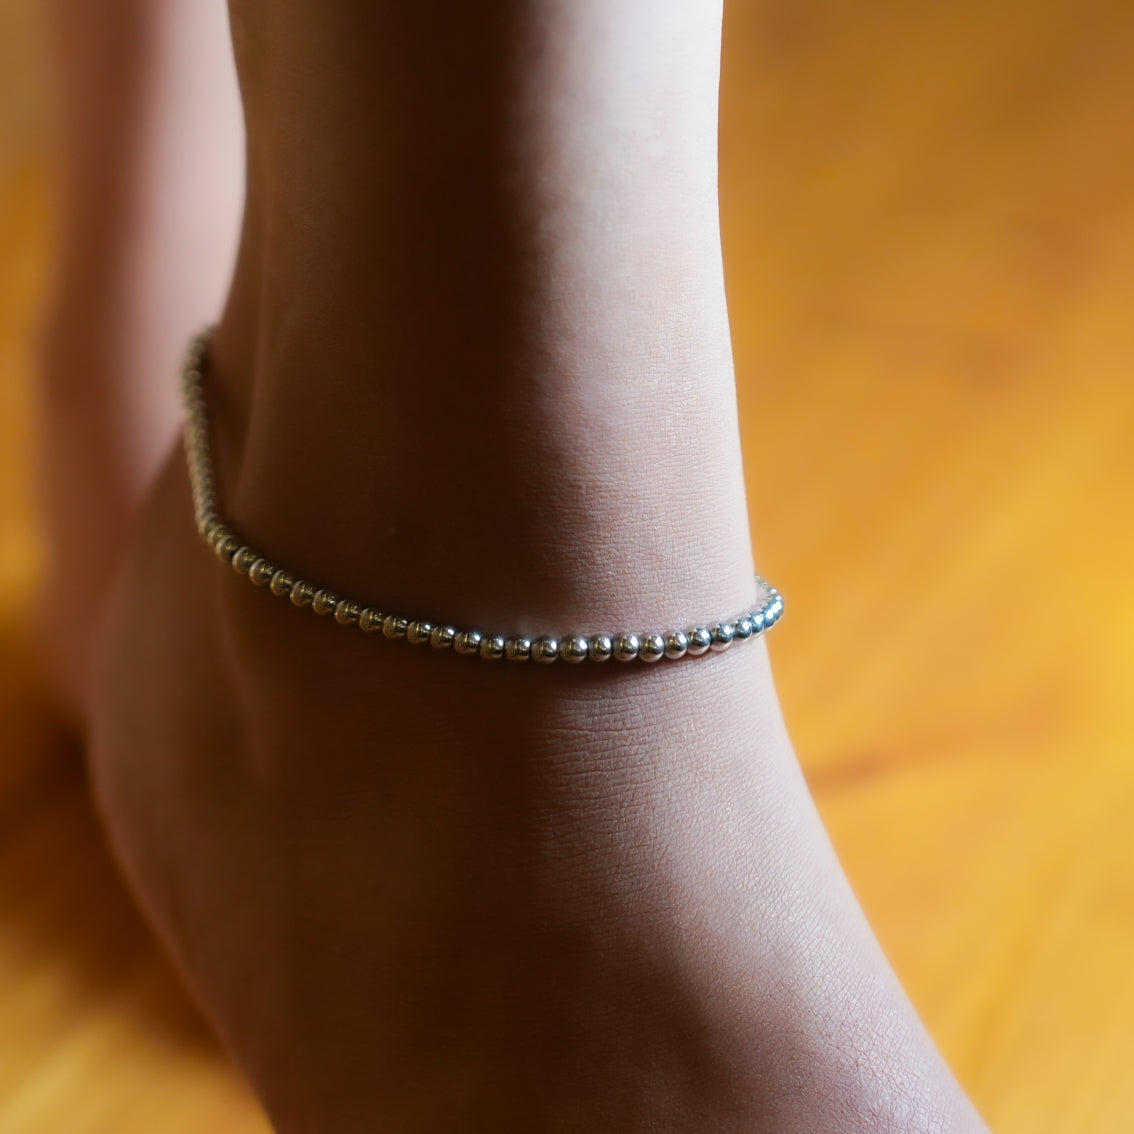 Style MANAMI LG 6494S: Ball-Beads Contemporary Chain Silver Anklet.